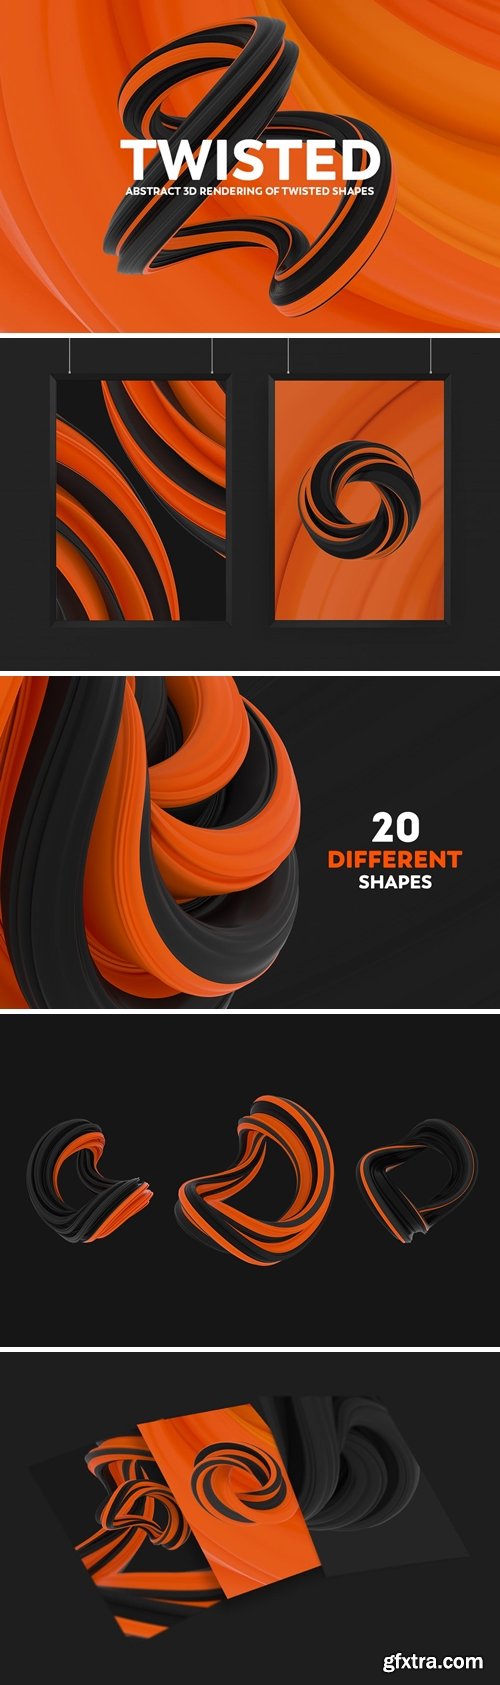 Abstract 3D rendering of Twisted Shapes